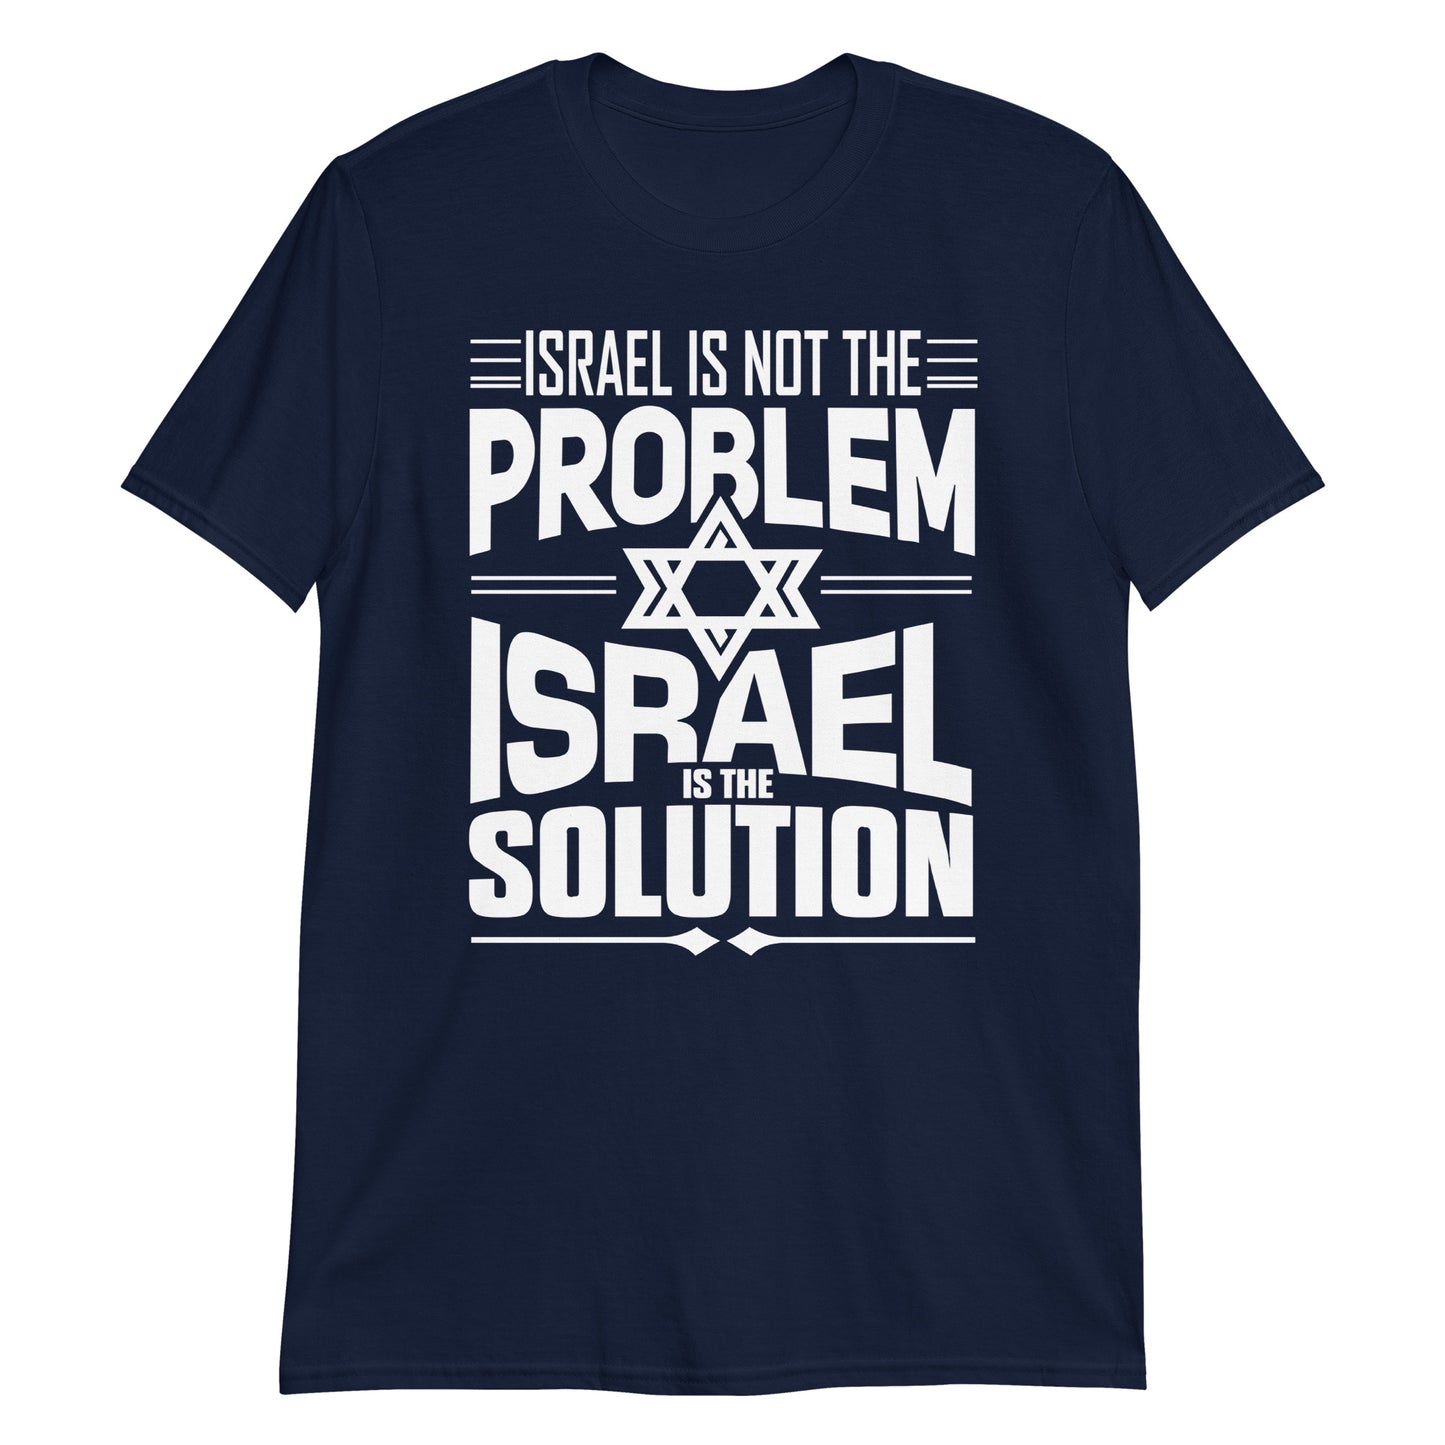 Israel Is The Solution - Short-Sleeve Unisex T-Shirt